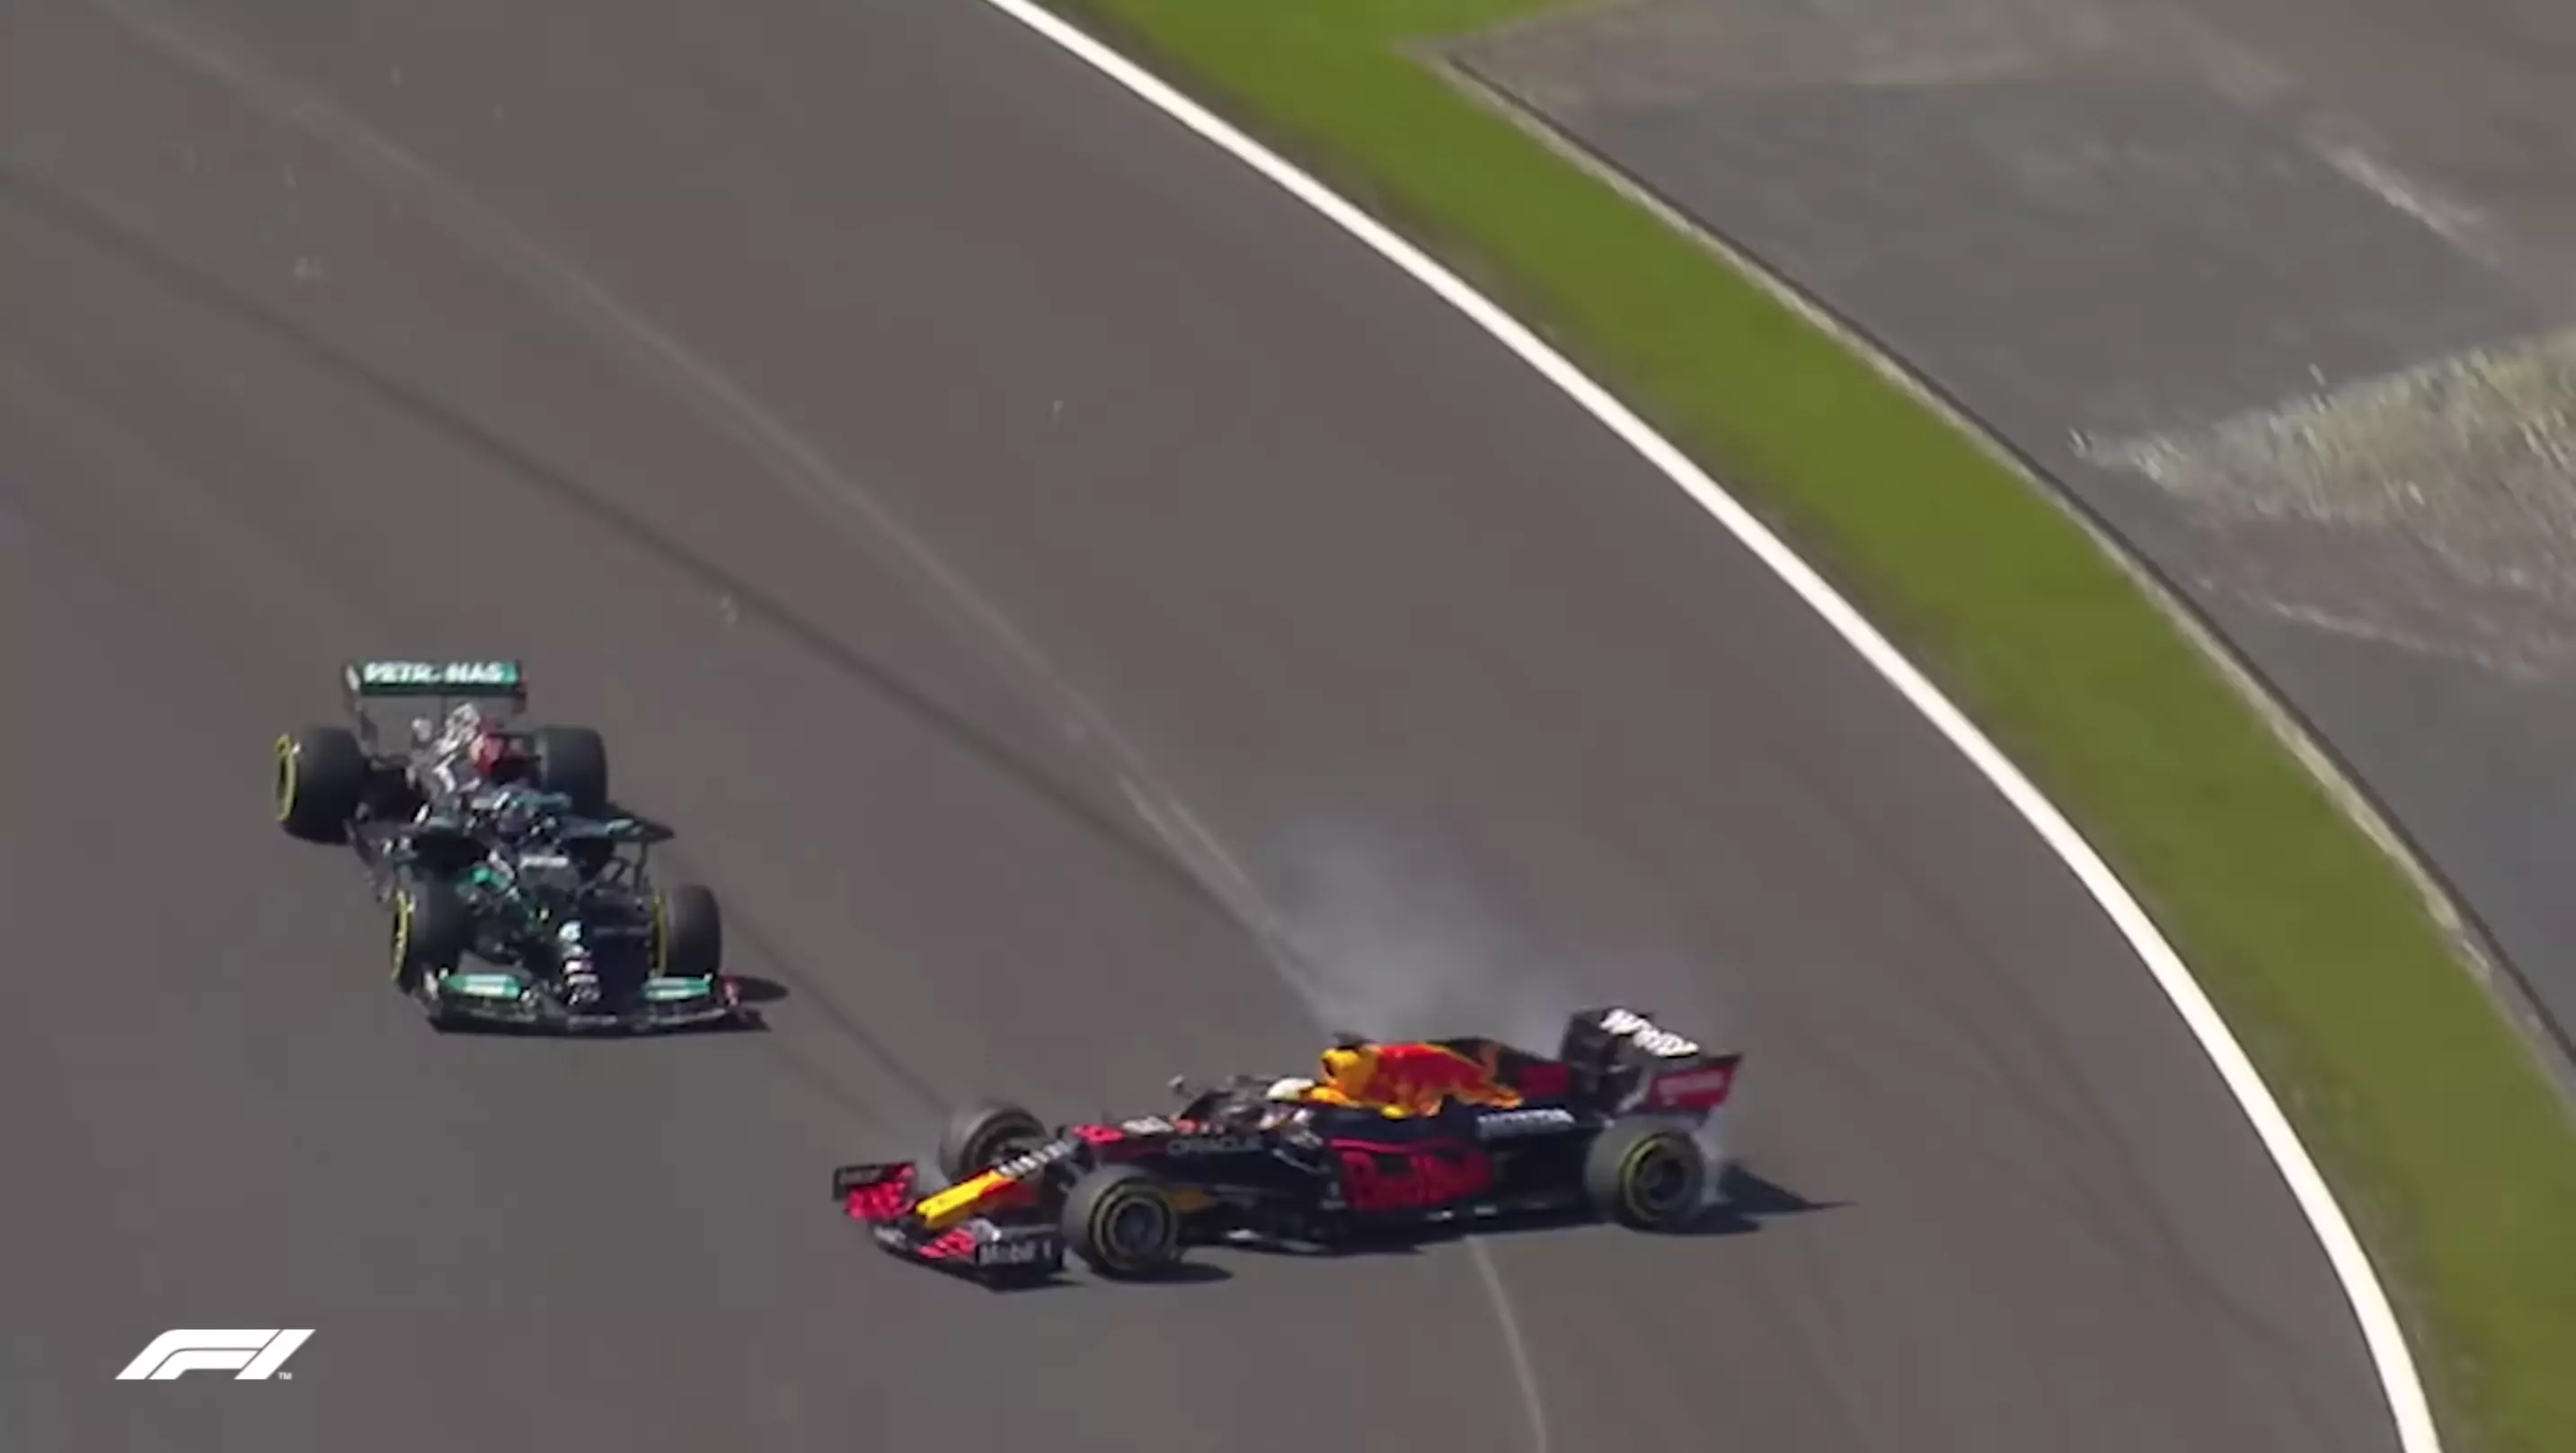 Lewis Hamilton and Max Verstappen’s Controversial Crash Was a Racing Incident — That’s All | Autance